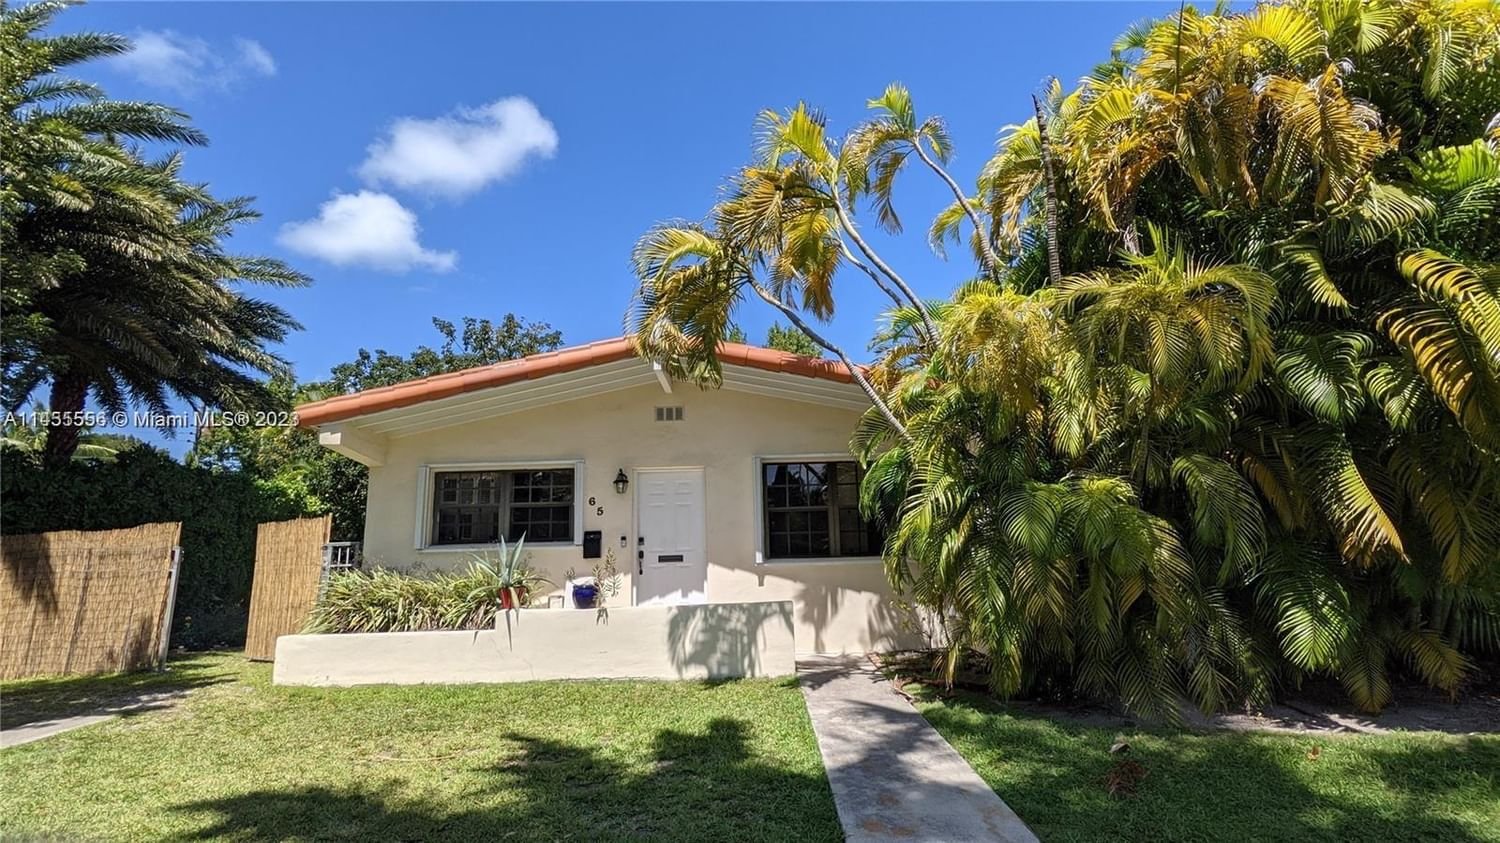 Real estate property located at 165 Hampton Ln, Miami-Dade County, Key Biscayne, FL